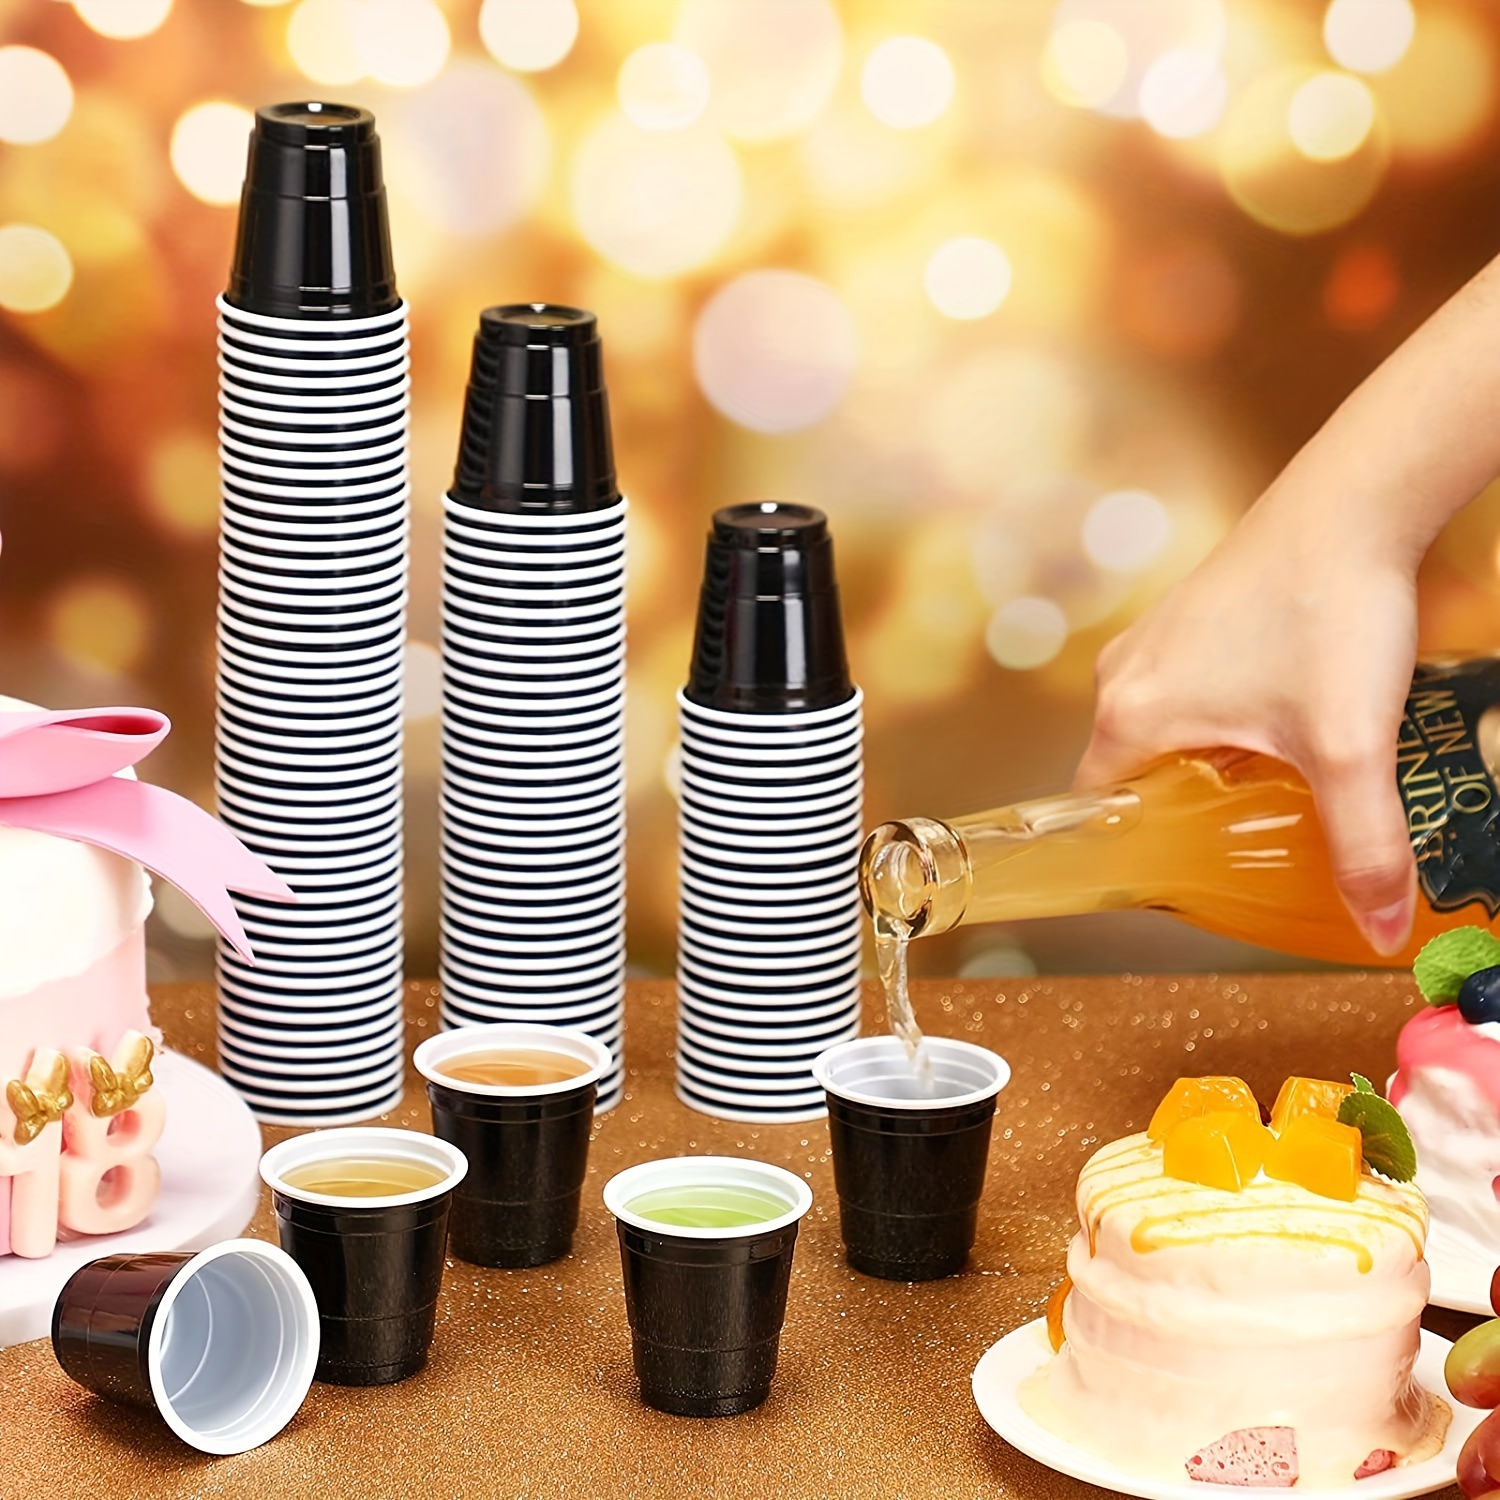 100pcs Mini Plastic Cups, 2 Oz Black Cups, Disposable Red Black Small  Plastic Cups, Suitable For Party Wine Tasting, Condiments, Snacks, Sauce  Samples